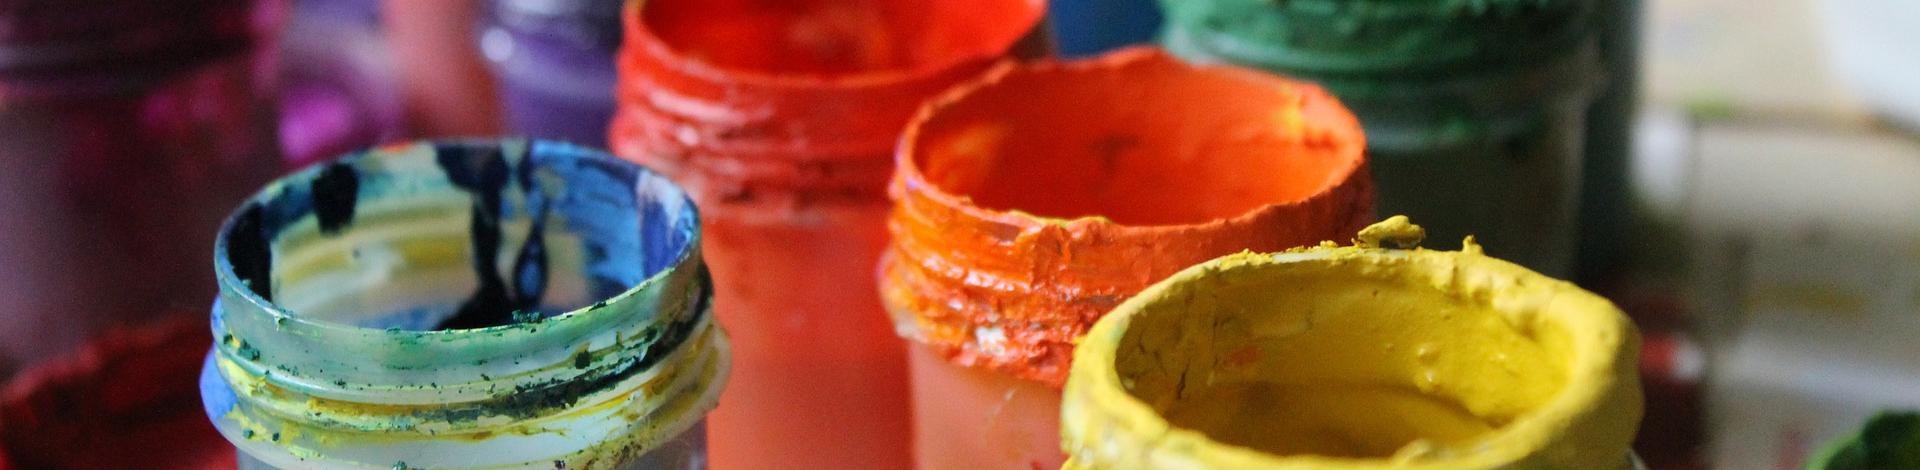 Open pots of paint sitting on a table, yellow, orange, red, green and blue.